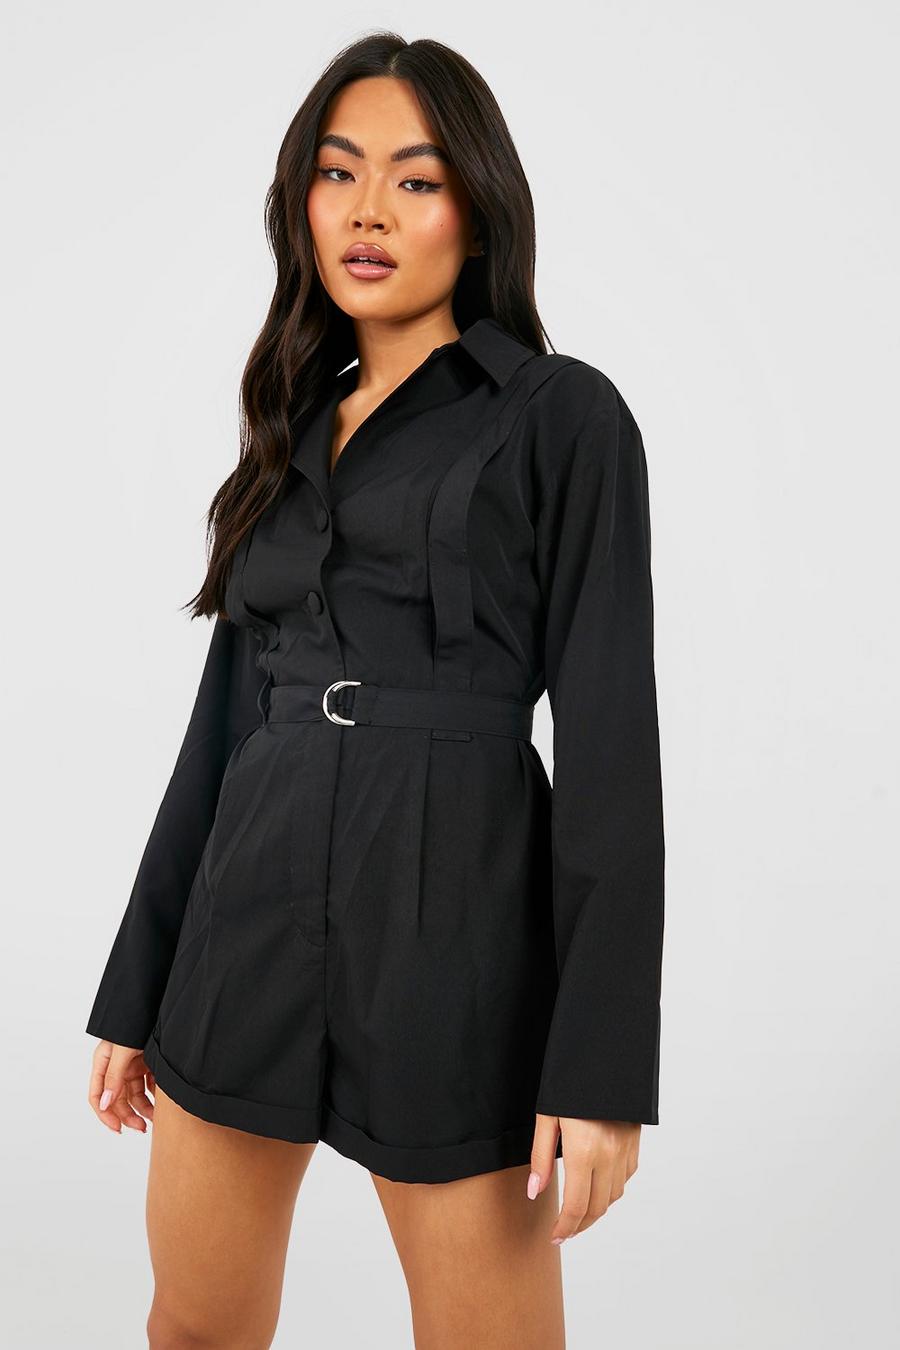 Black Belted Shirt Style Utility Playsuit